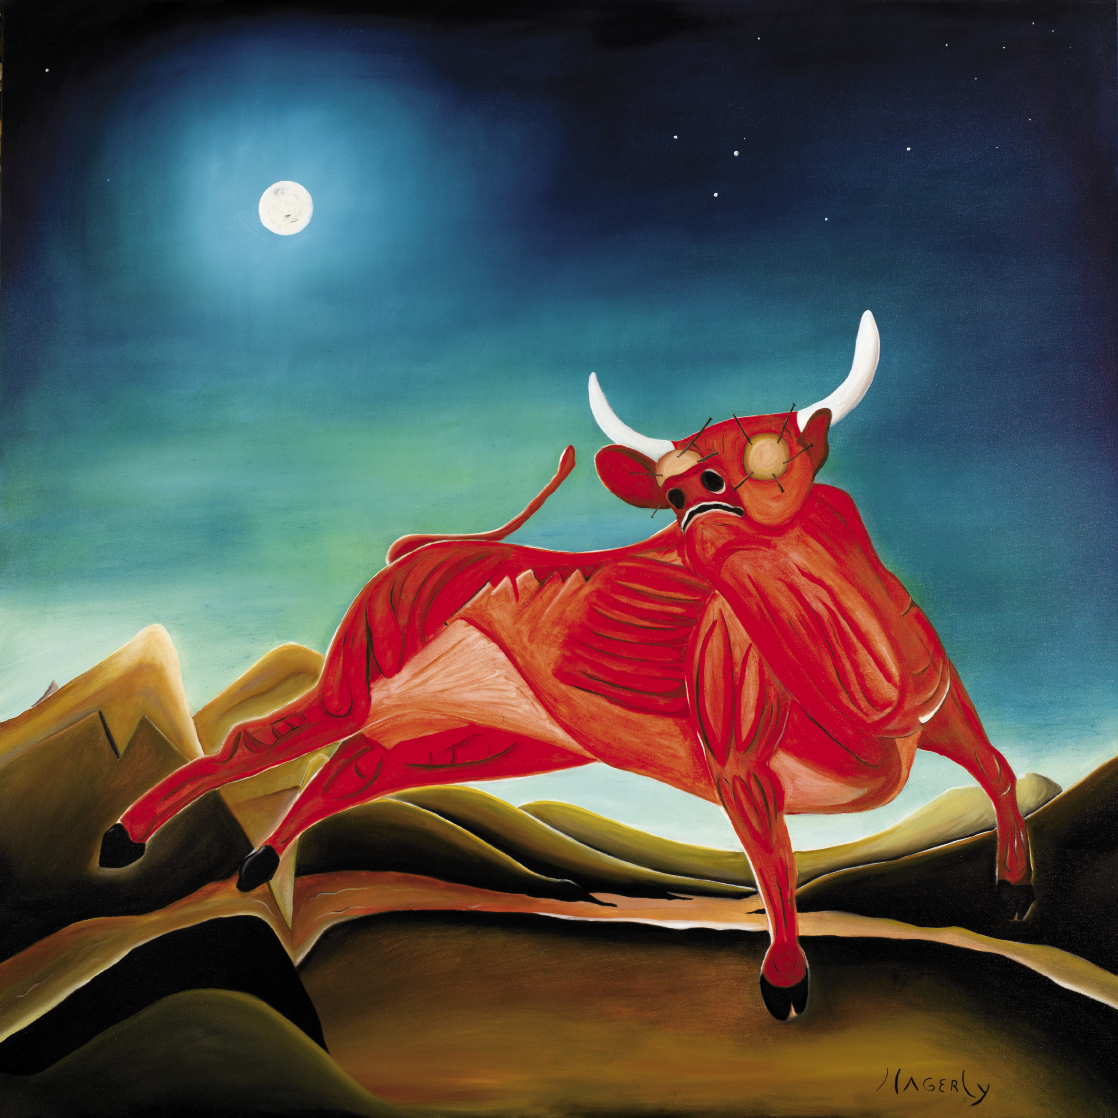 Hagerty frequently depicts himself as a bull [above: Bull (Self Portrait), 2007, oil on canvas, 48 x 48 inches]. Here the animal has painting canvases pinned over its eyes. His dyslexia and rampant imagination often left him feeling “like a bull in a china shop,” the artist explains.